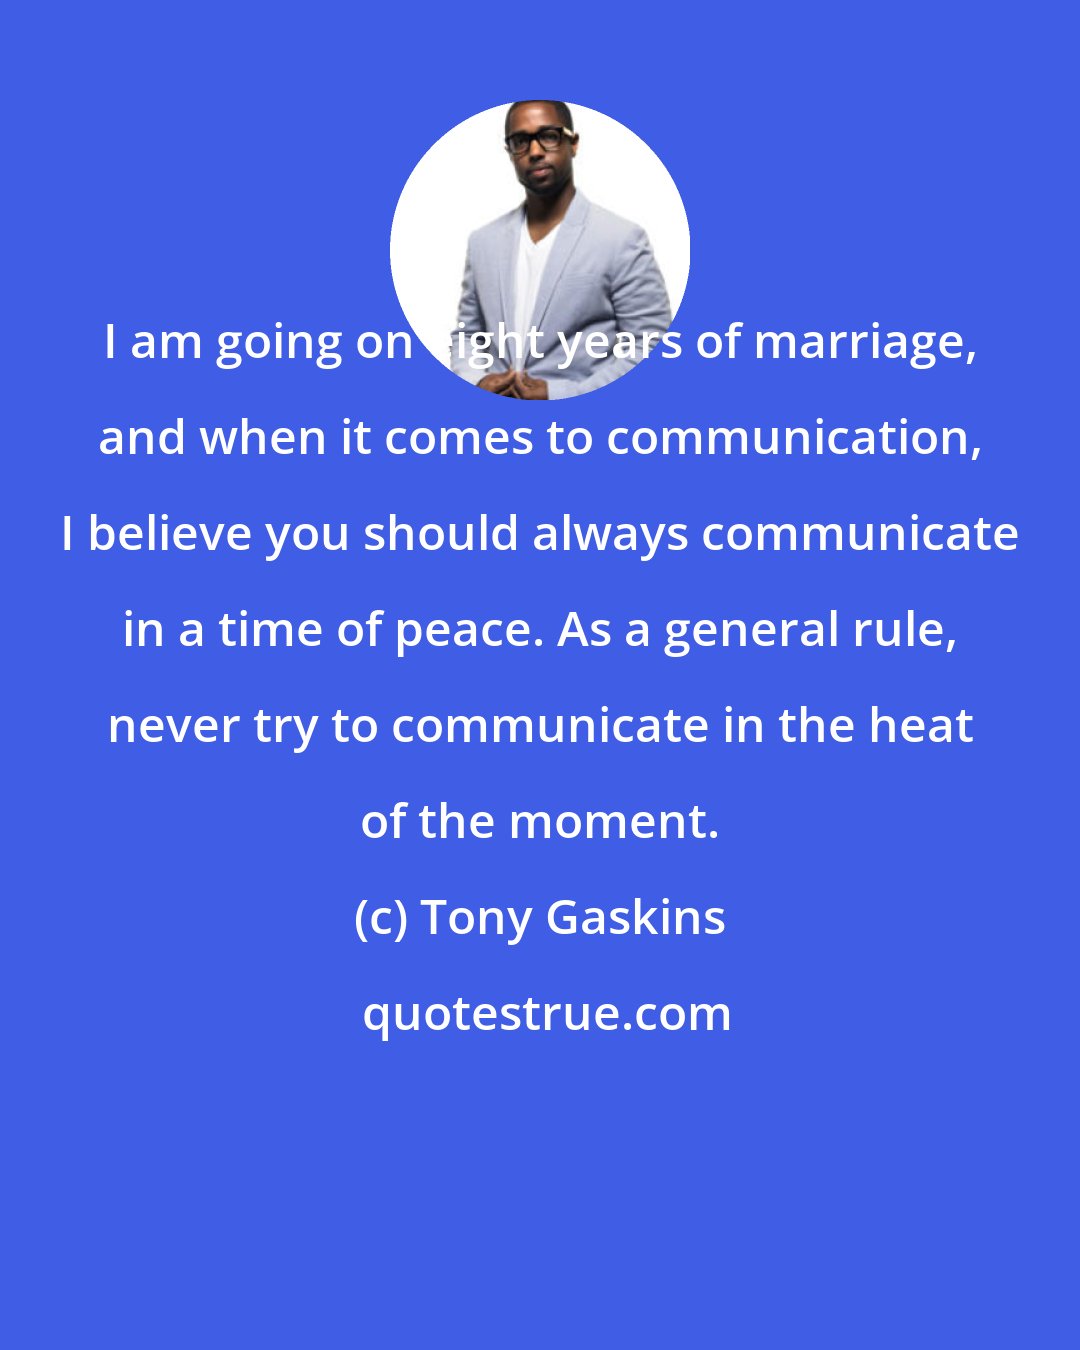 Tony Gaskins: I am going on eight years of marriage, and when it comes to communication, I believe you should always communicate in a time of peace. As a general rule, never try to communicate in the heat of the moment.